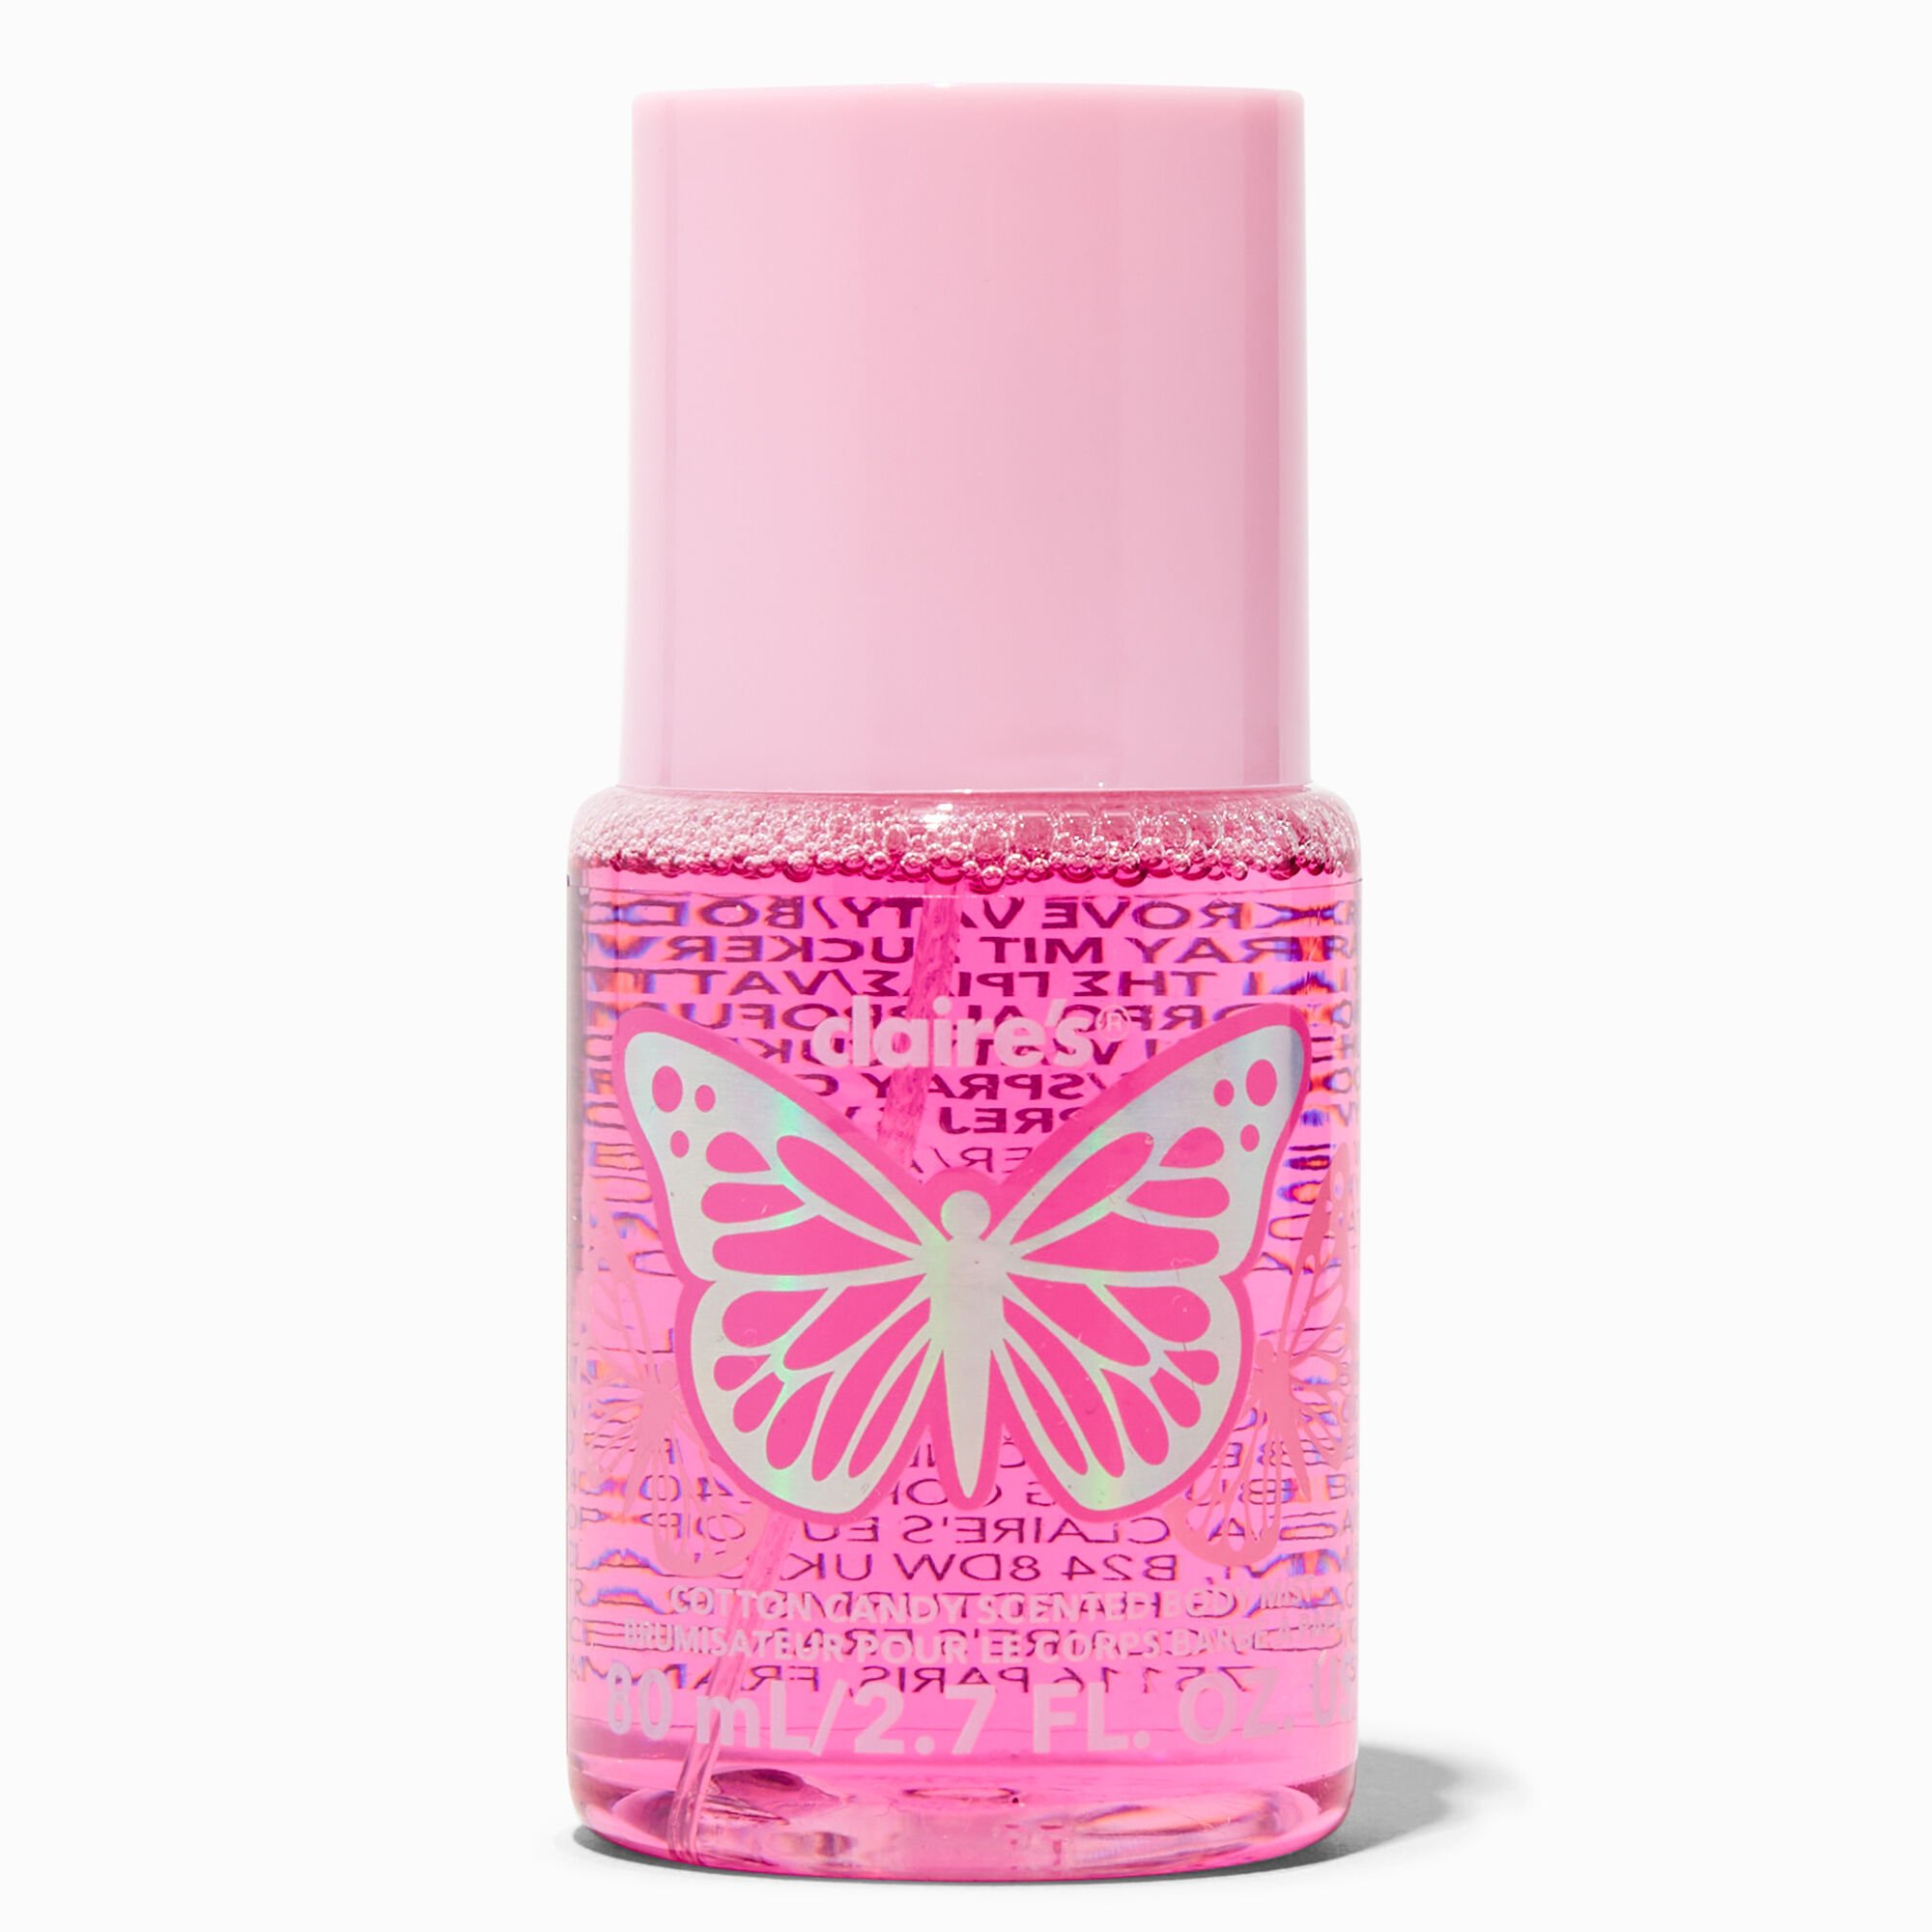 View Claires Butterfly Body Spray Pink information